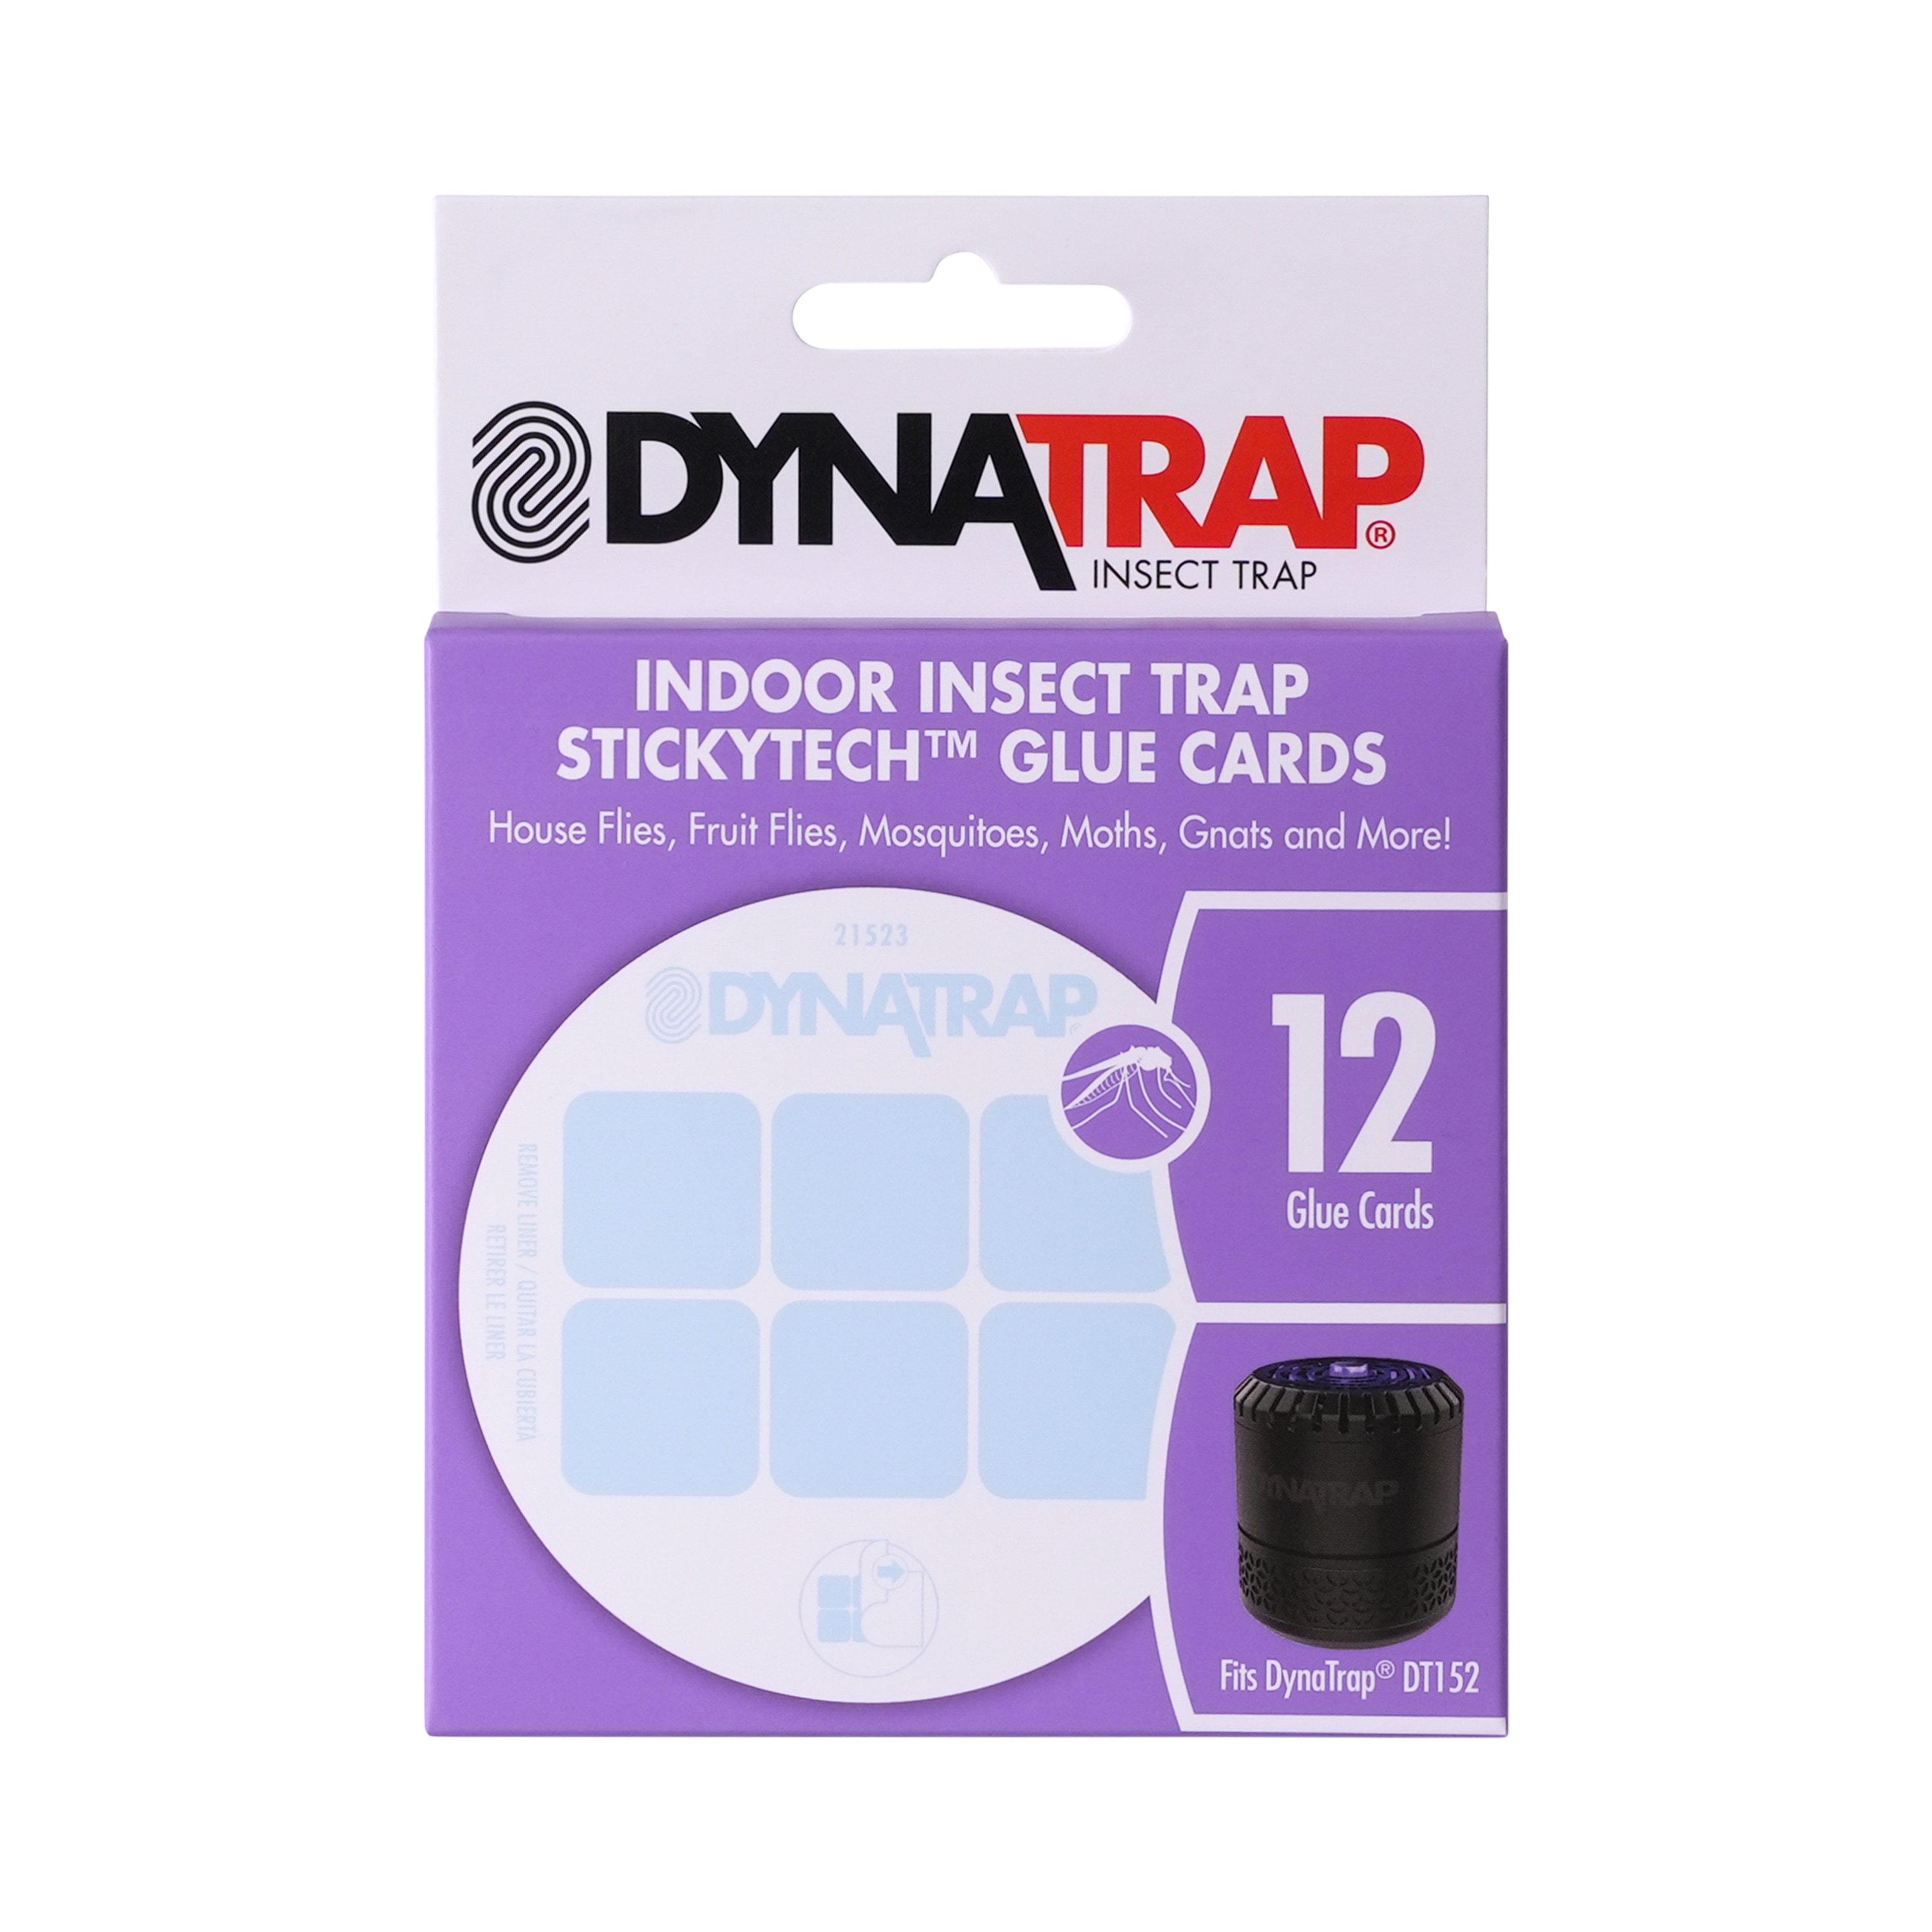 DynaTrap Indoor Insect Trap in the Insect Traps department at